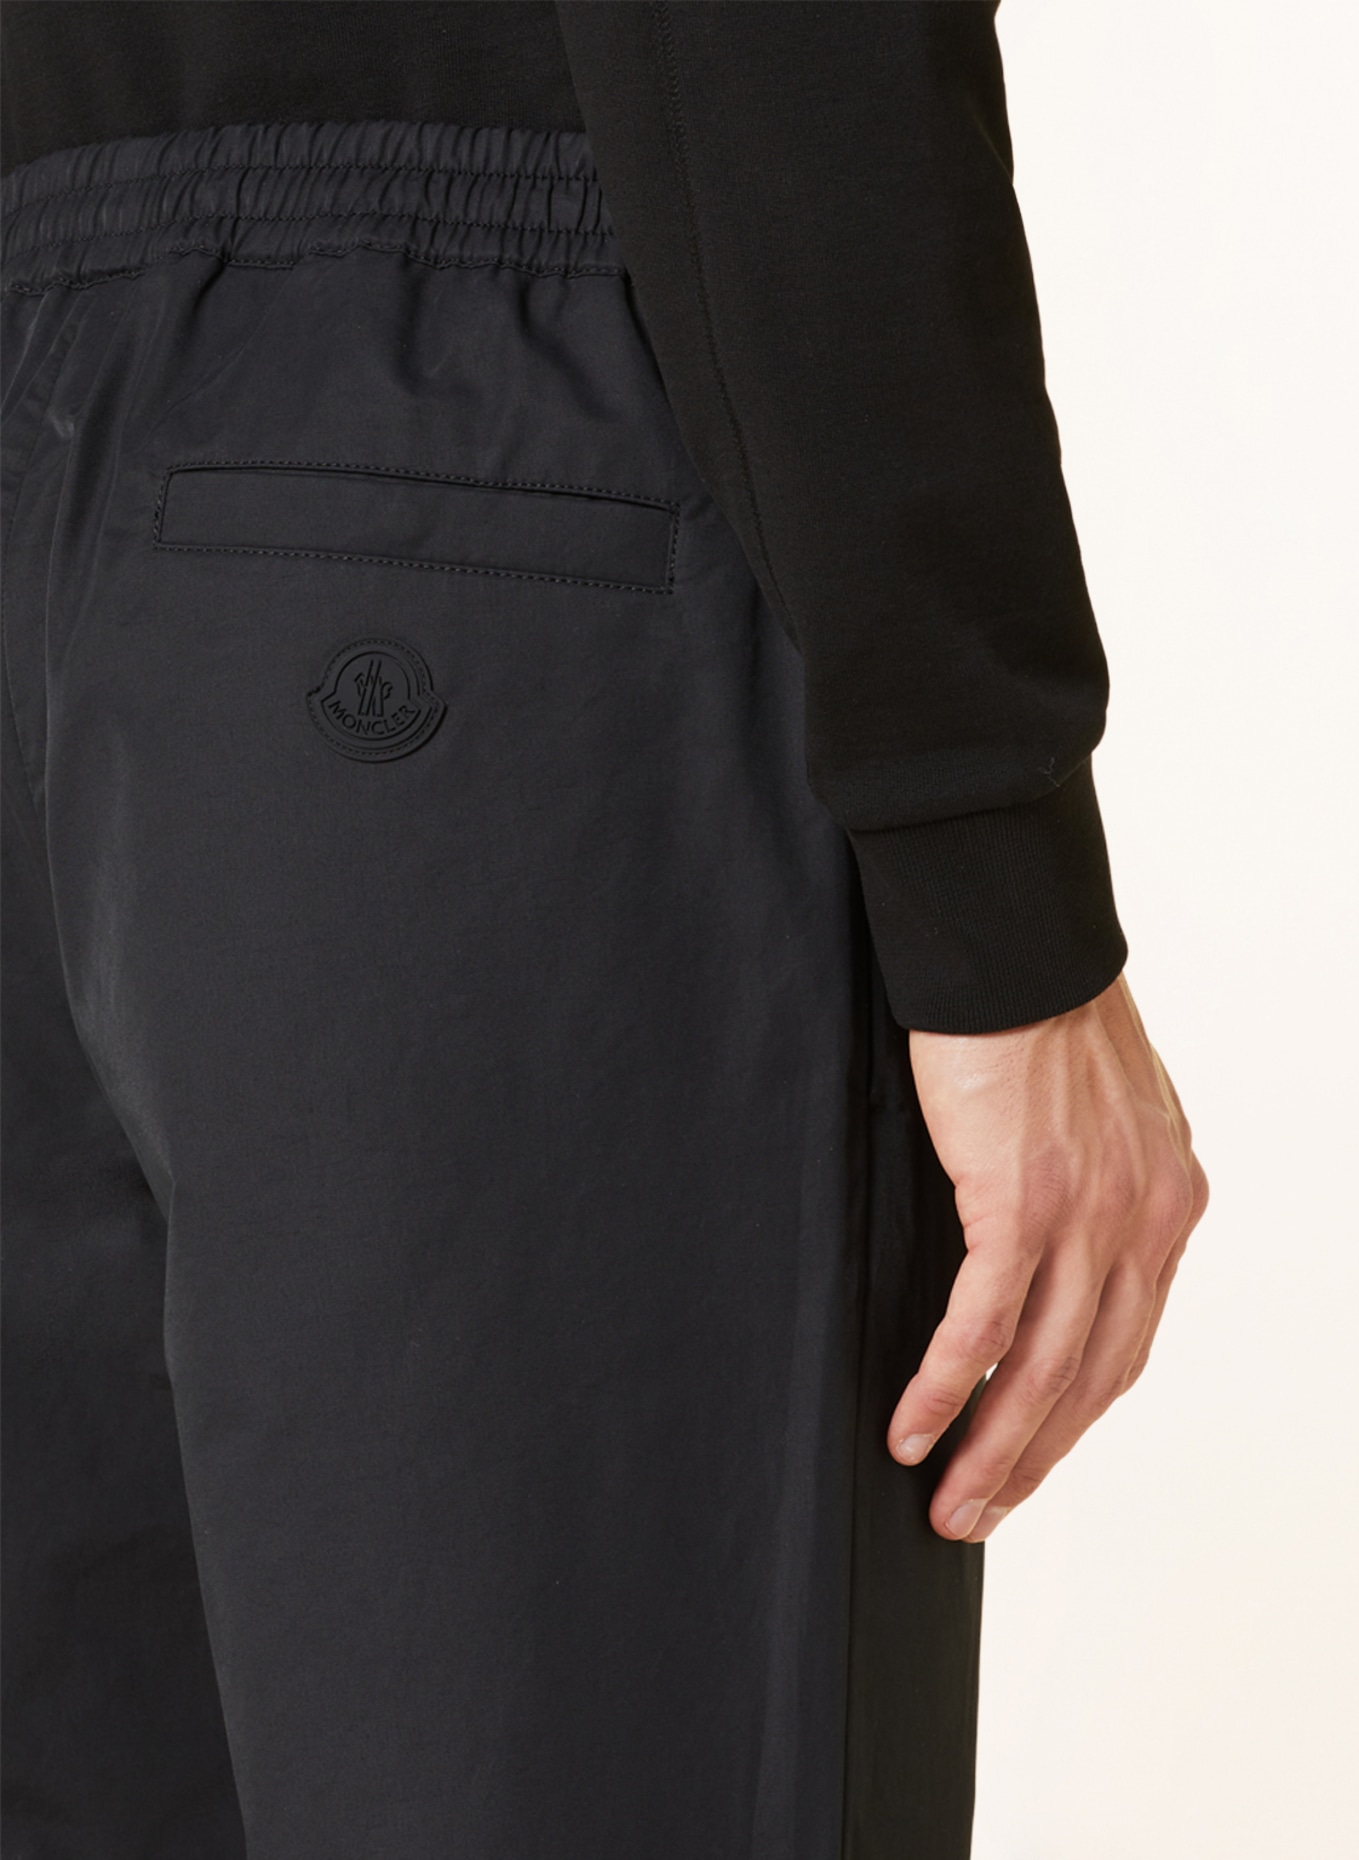 MONCLER Pants in jogger style extra slim fit, Color: BLACK (Image 6)